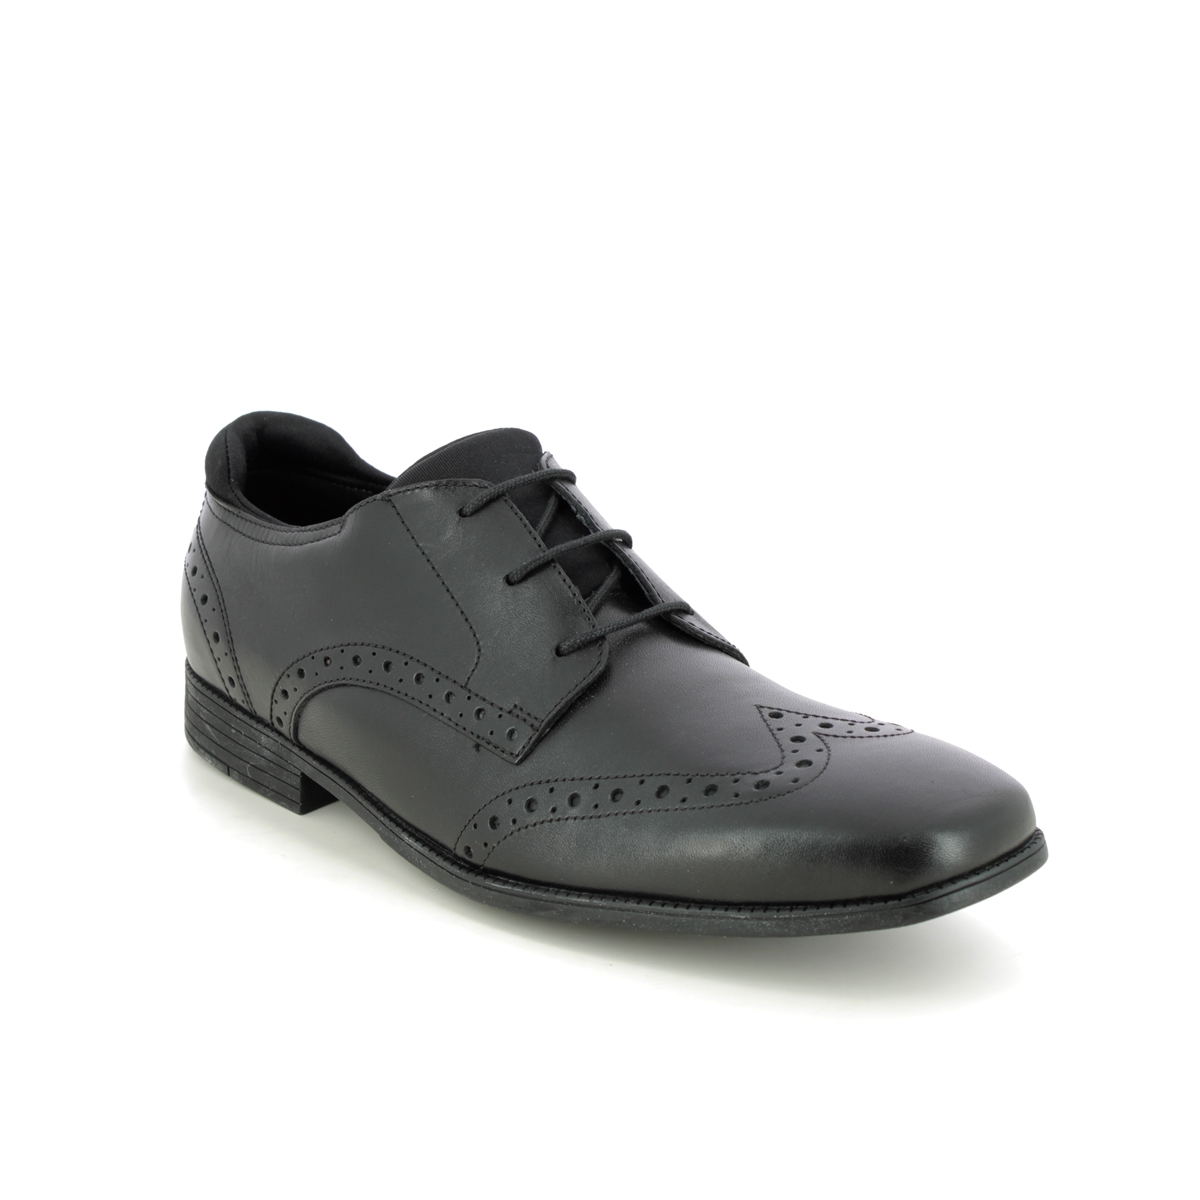 Start Rite - Tailor In Black Leather 3513-76F In Size 6.5 In Plain Black Leather For School Boys Shoes  In Black Leather For kids